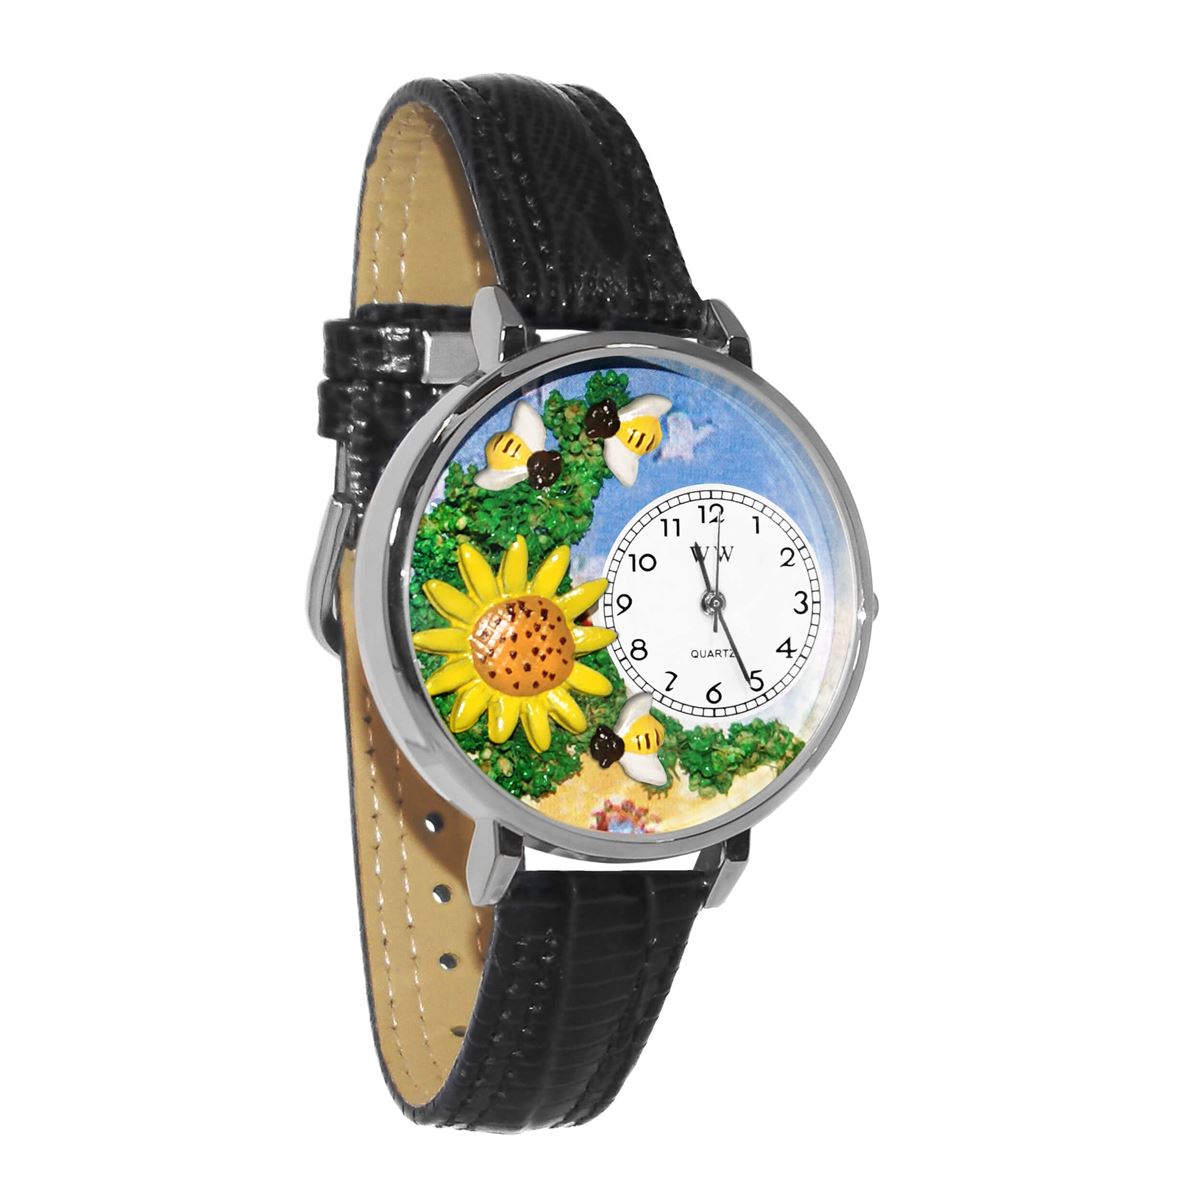 Whimsical Gifts | Sunflower 3D Watch Large Style | Handmade in USA | Holiday & Seasonal Themed | Spring & Summer Fun | Novelty Unique Fun Miniatures Gift | Silver Finish Black Leather Watch Band